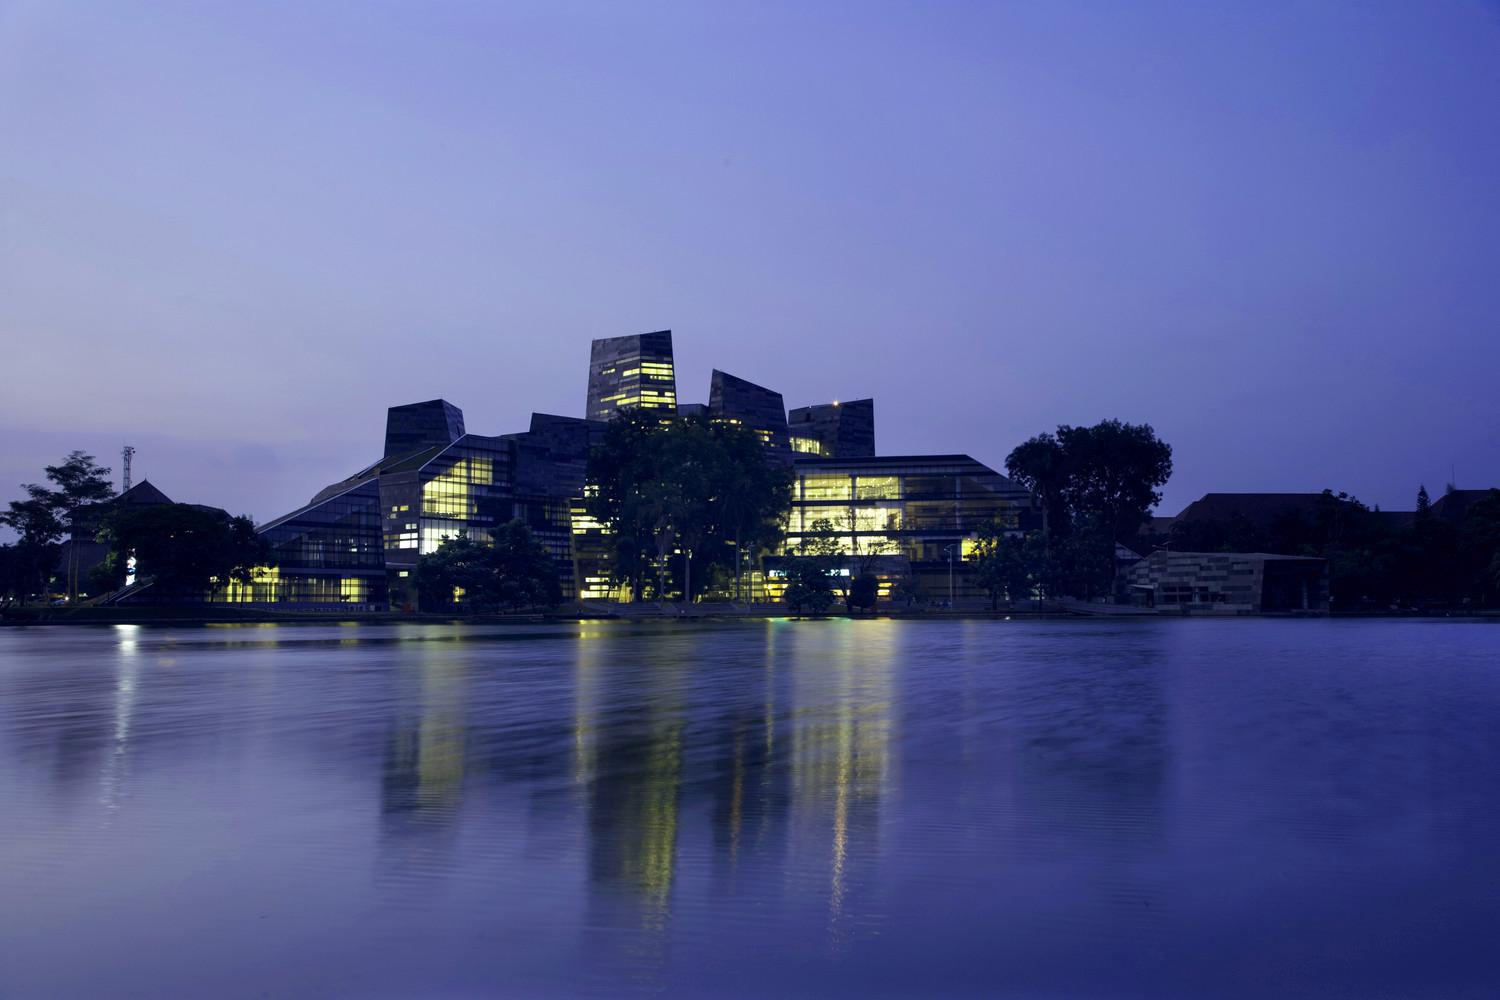 Central Library University - Night view from the lake